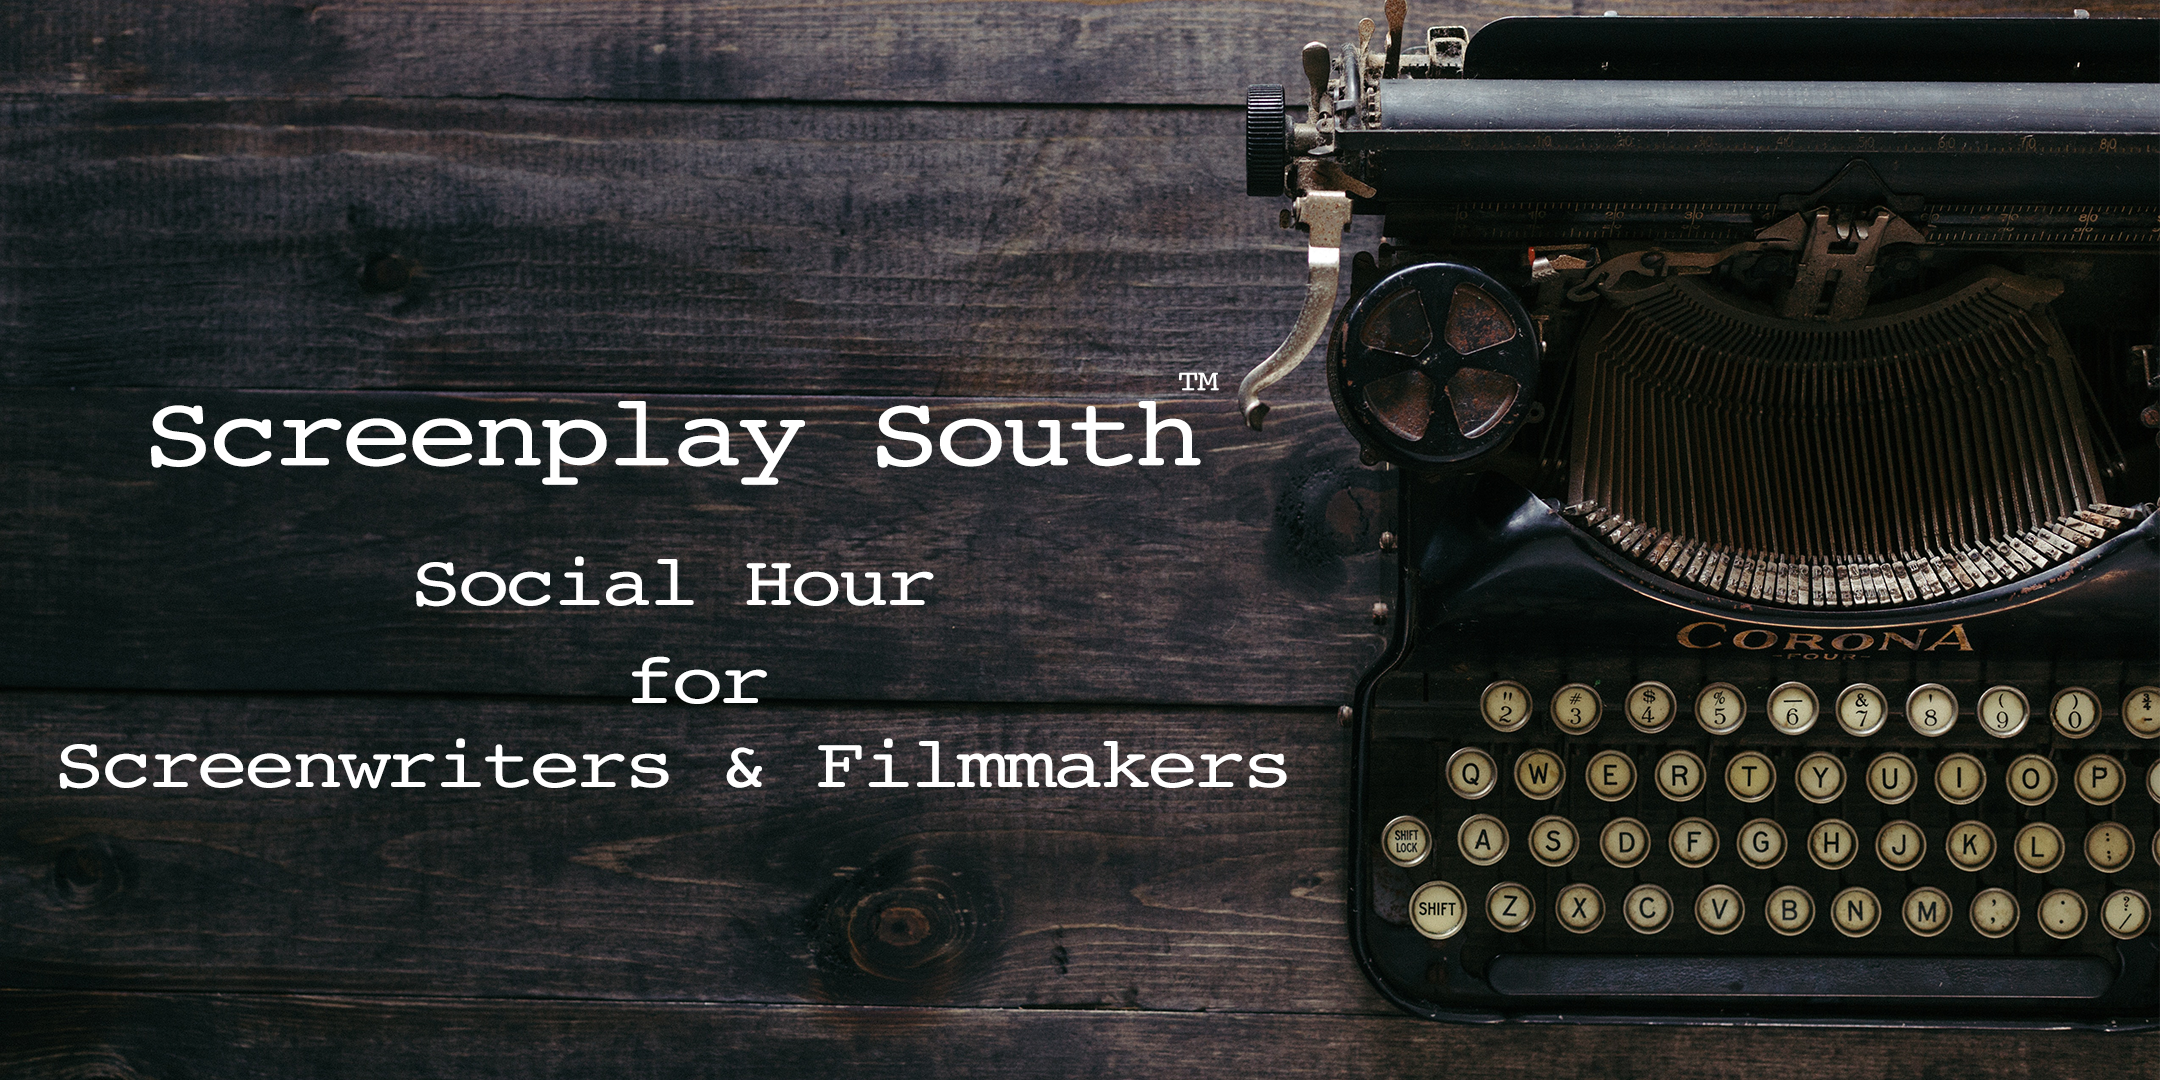 Screenplay South - Social Hour for Screenwriters & Filmmakers